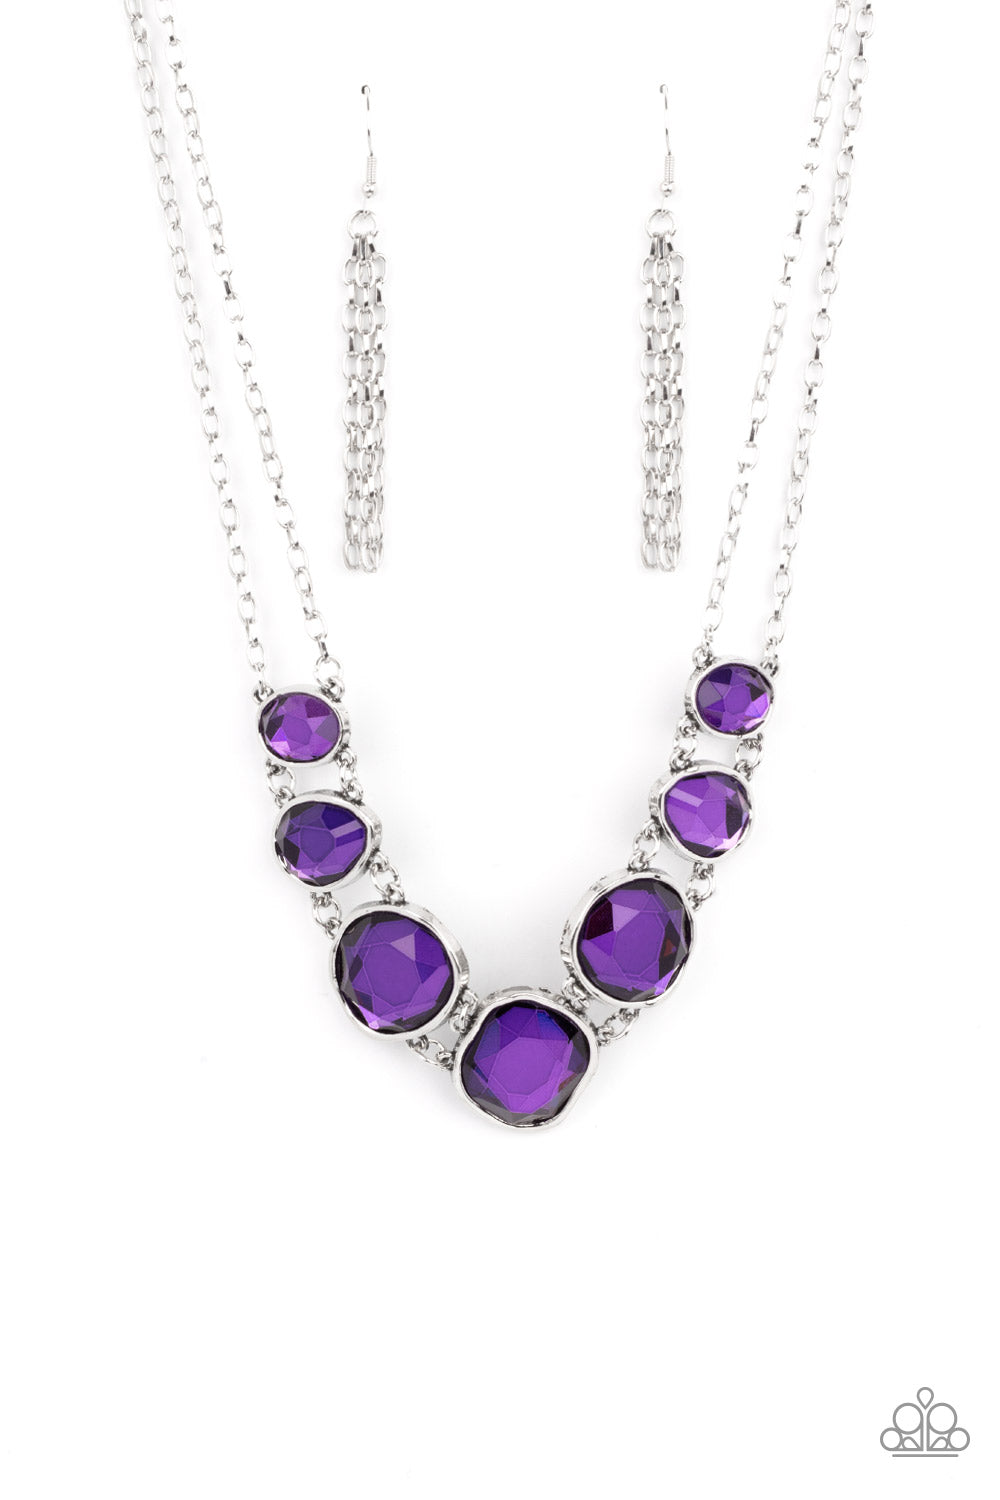 Absolute Admiration Necklace ( Purple, Silver, Green)